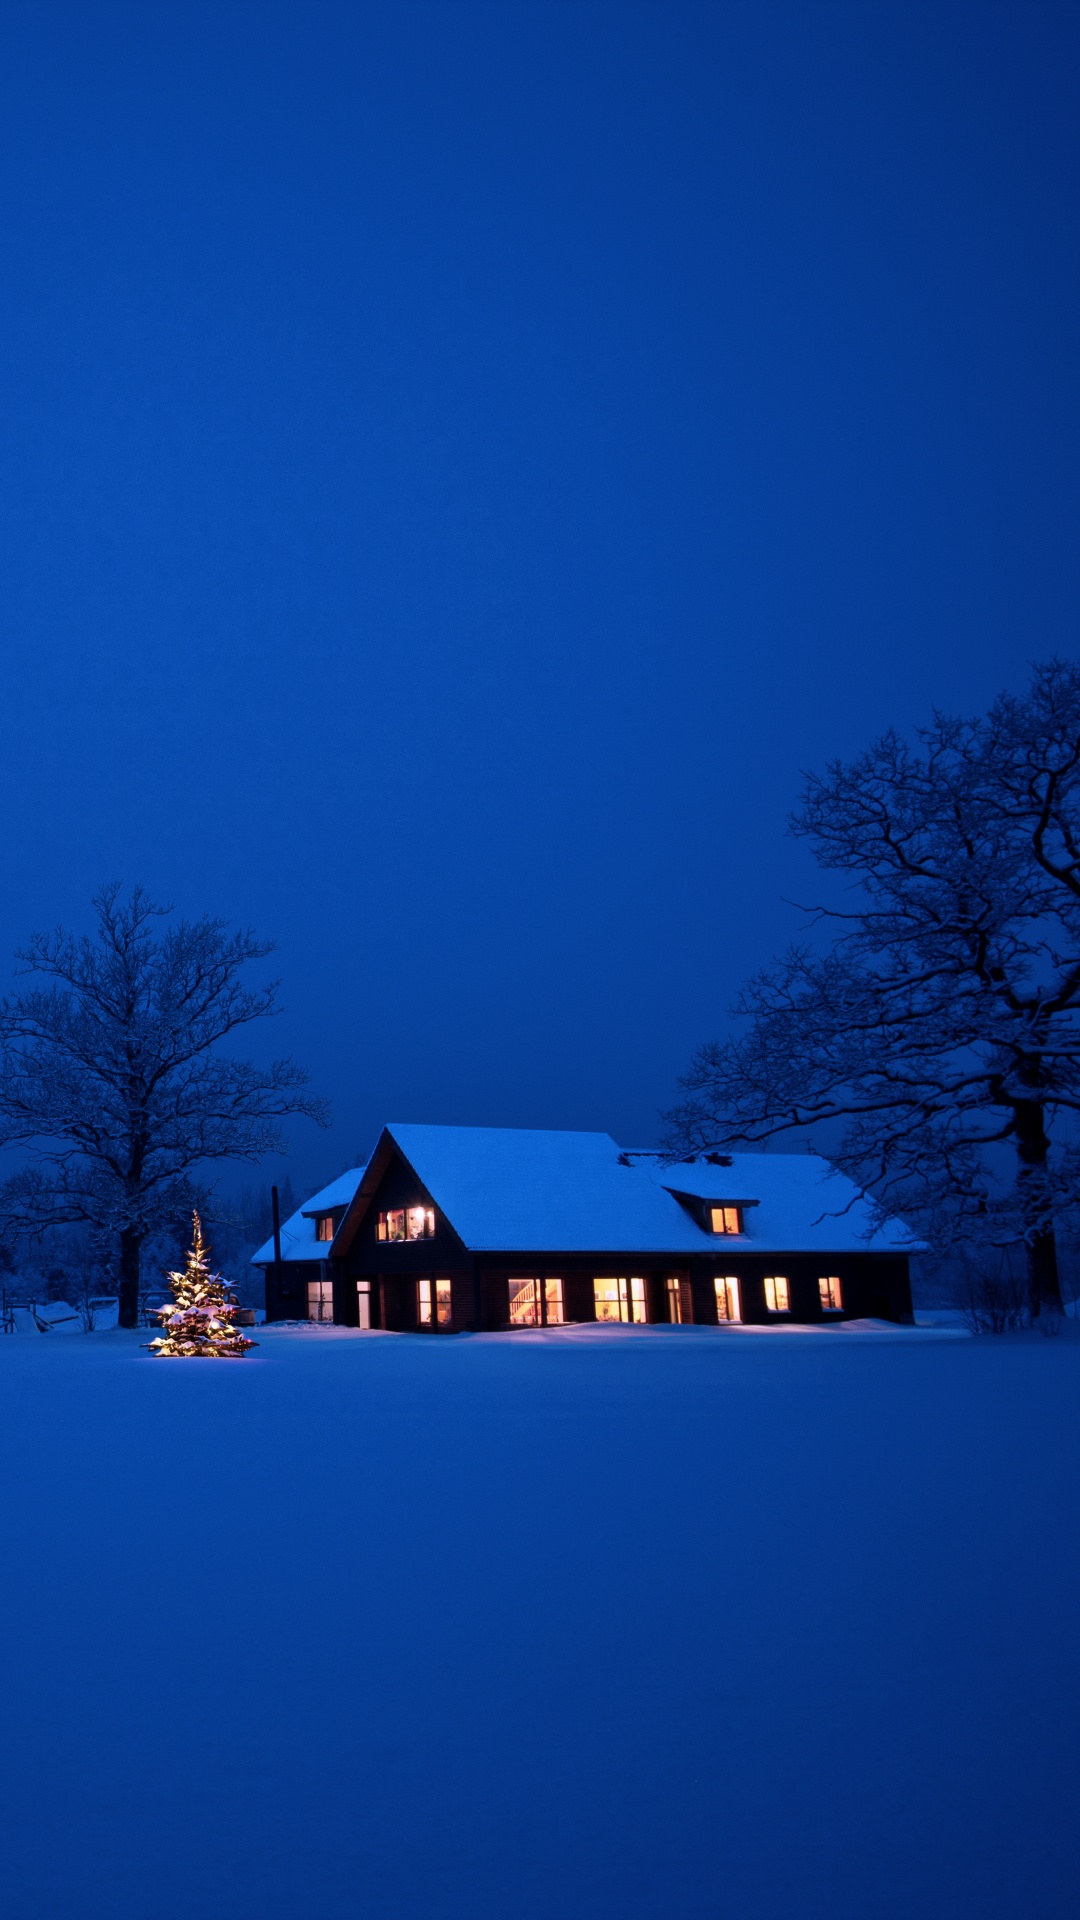 Brown Wooden House on Snow Covered Ground During Night Time. Wallpaper in 1080x1920 Resolution